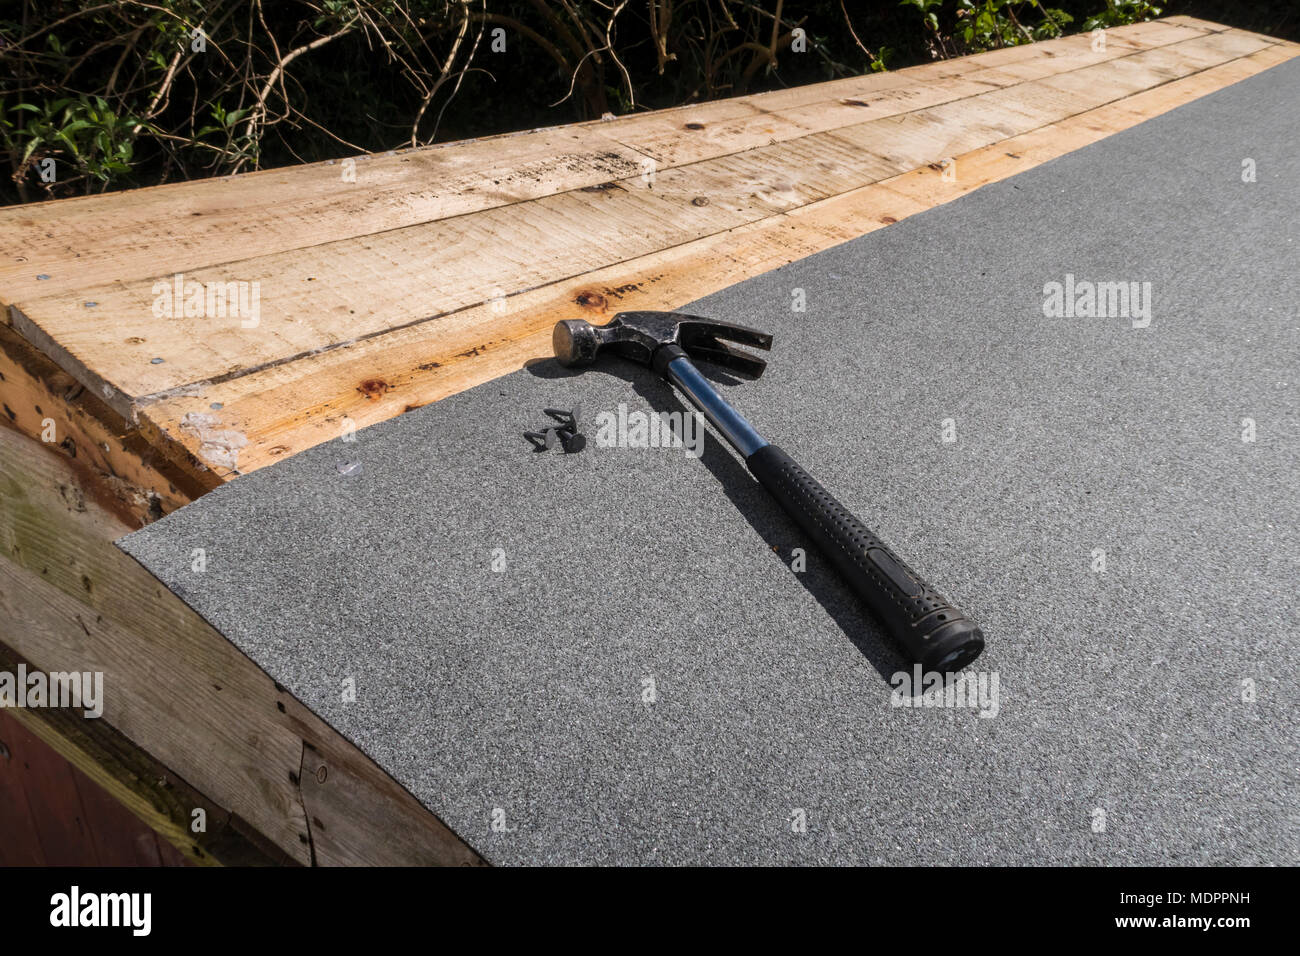 Repairing a leaking shed roof. Claw hammer and clout nails on top of  new mineral coated roofing felt with overlap. Stock Photo